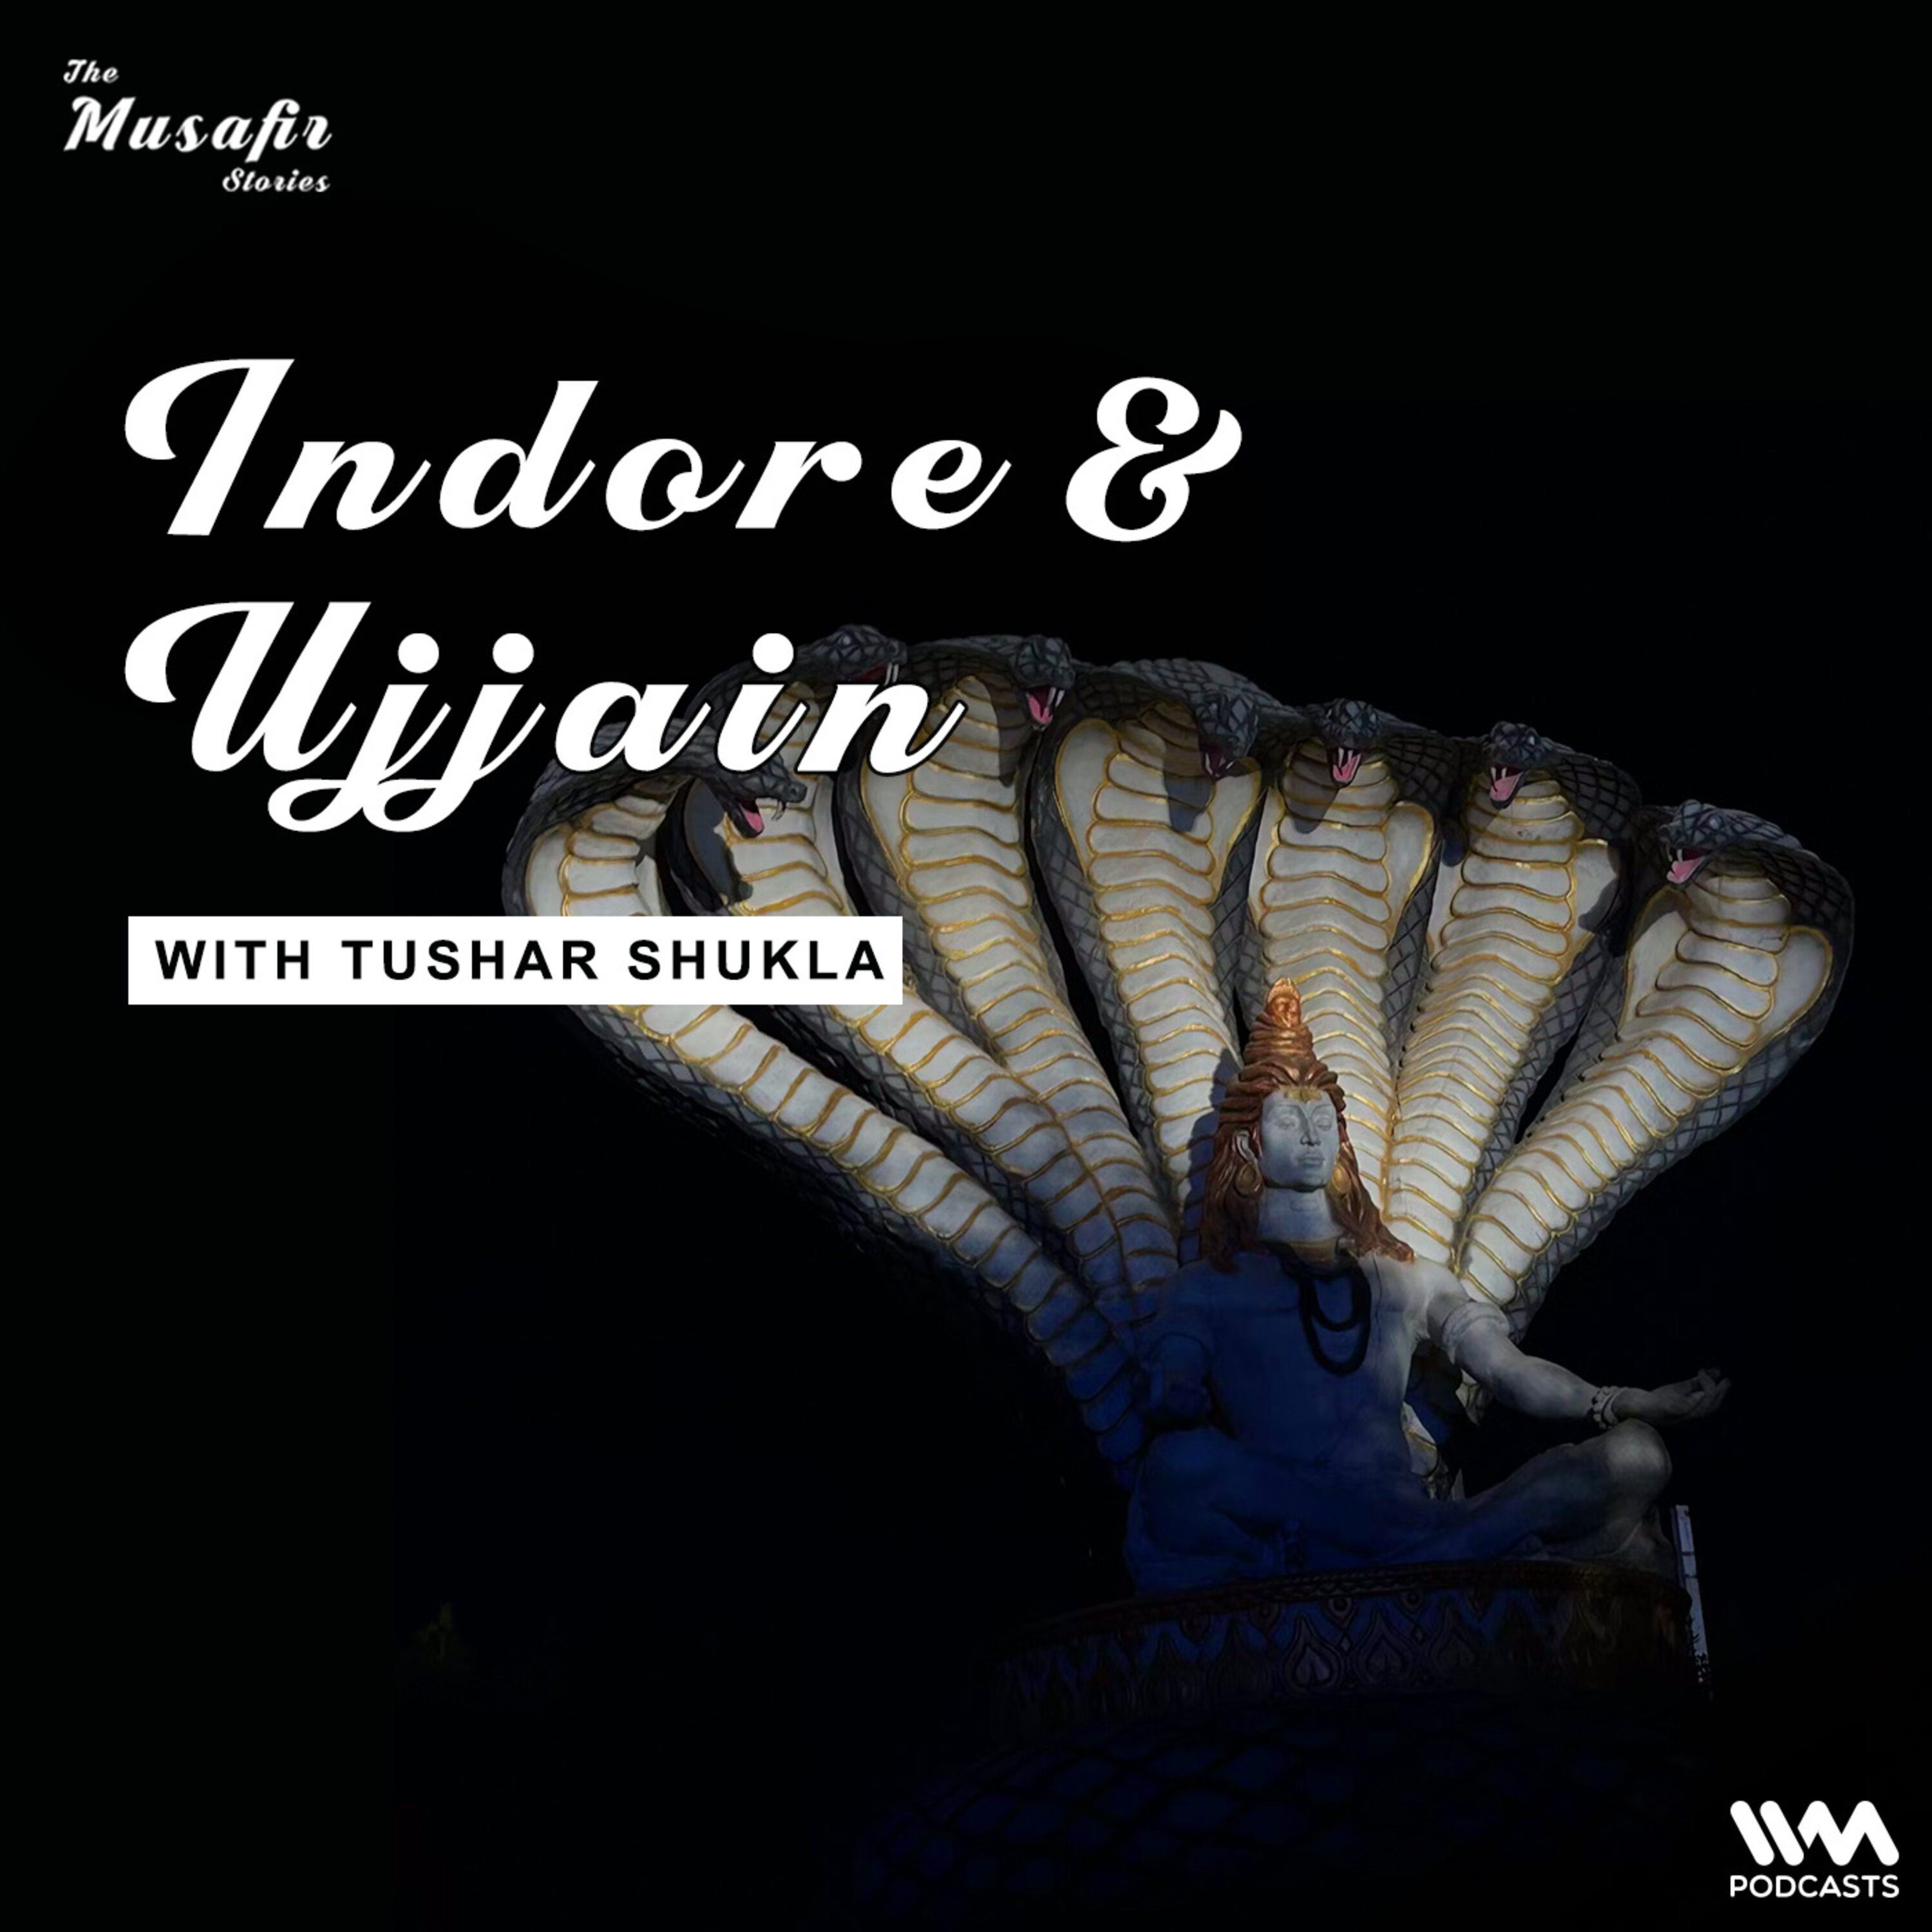 Indore and Ujjain with Tushar Shukla